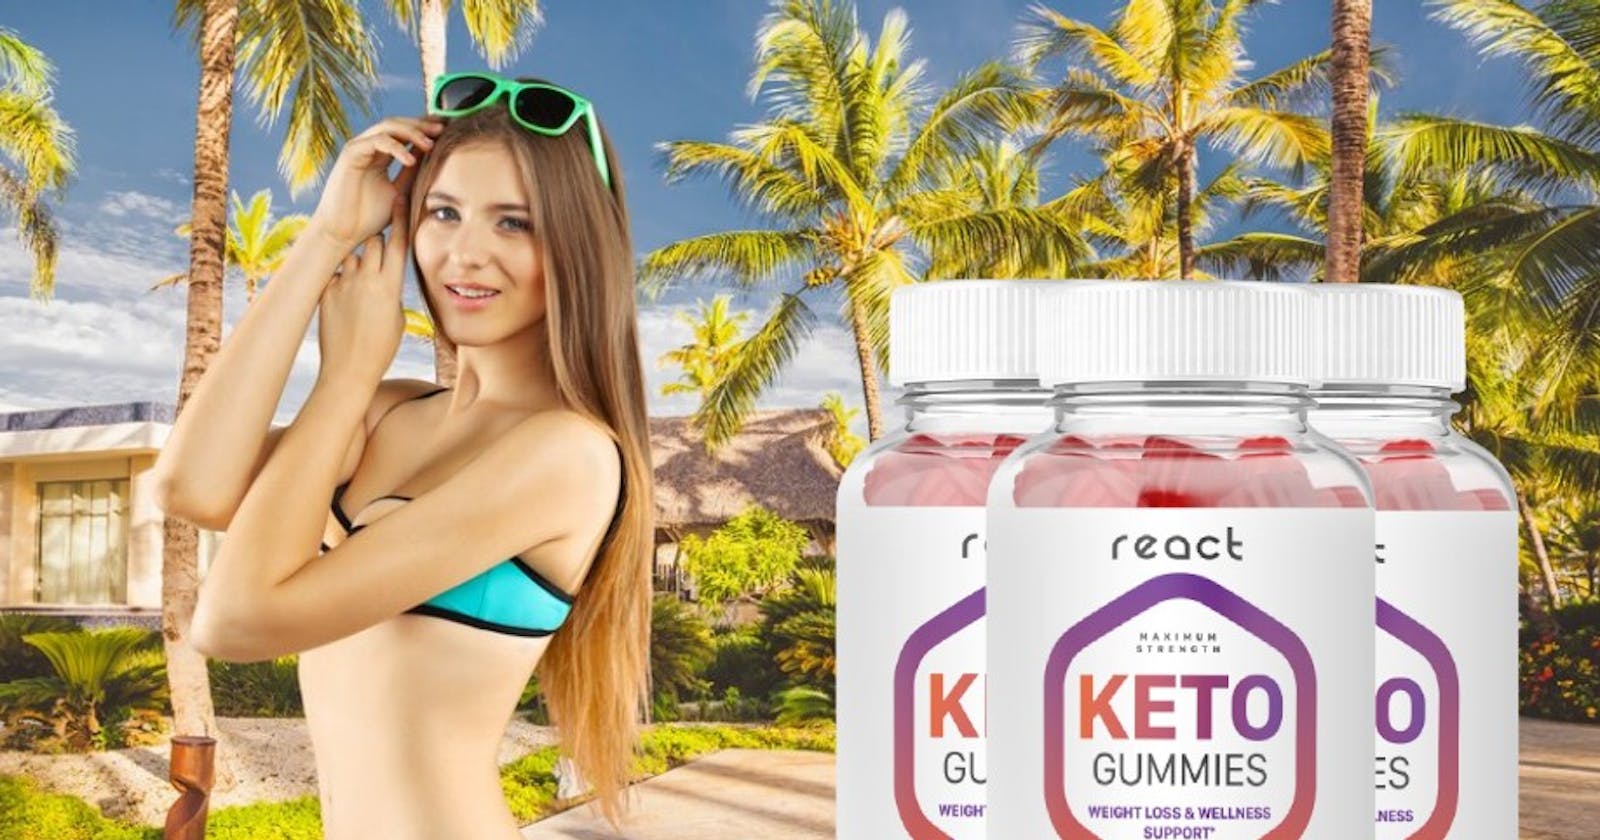 React Keto Gummies Reviews For Weight Loss?